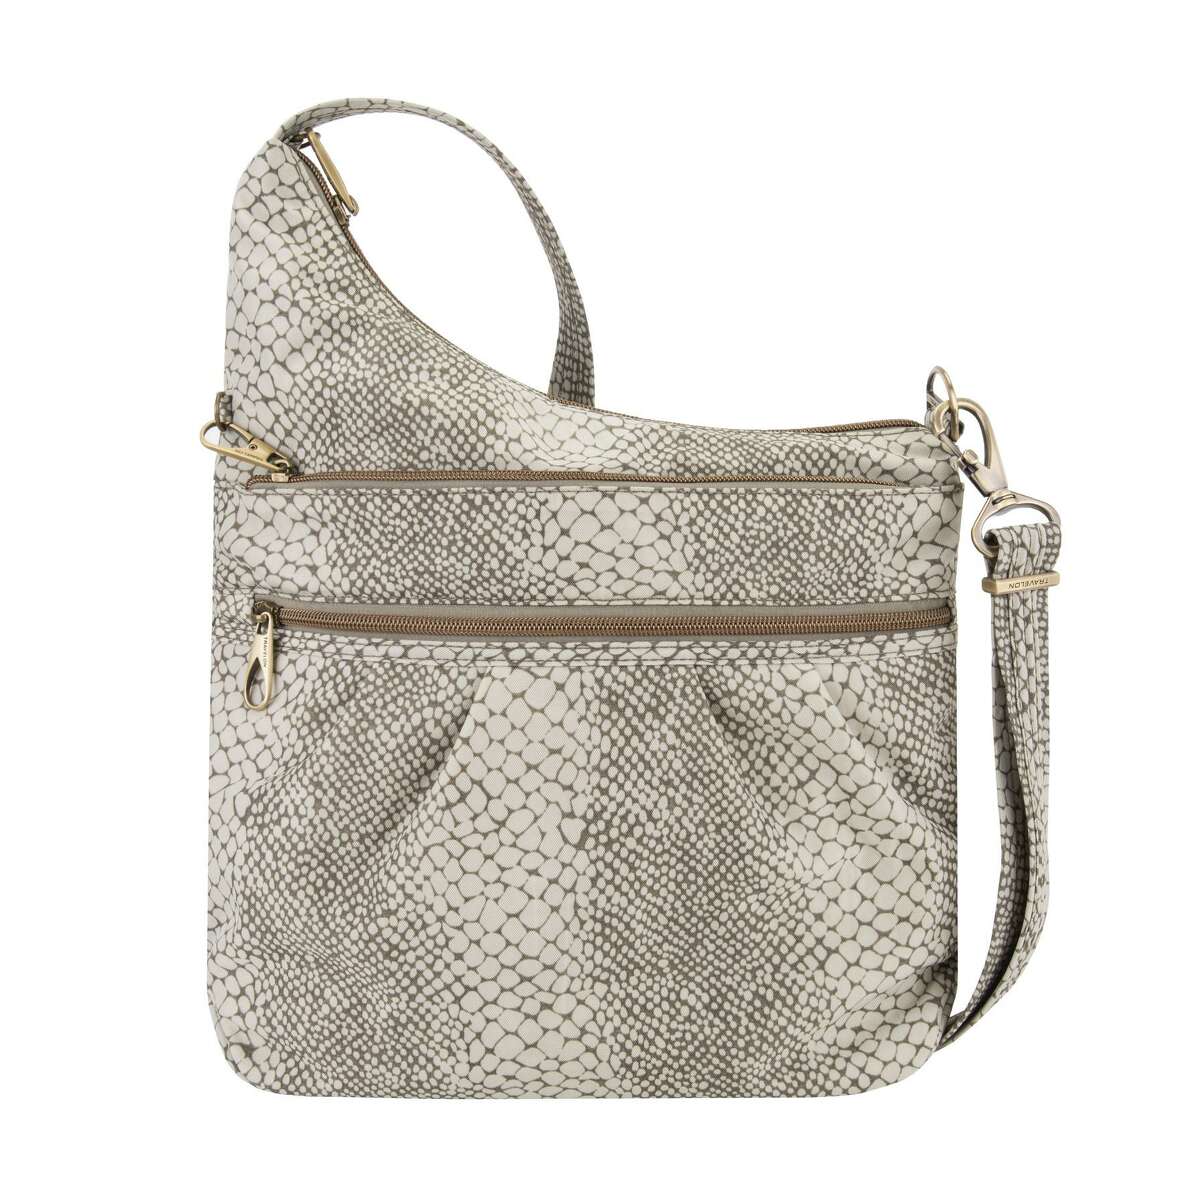 Travelon’s new snakeprint bags provide a fun and neutral color with the safety features that we’ve come to expect from Travelon, including slash-resistant fabric and straps and RFID protection for credit cards. This crossbody design has plenty of zippered pockets for easy organization.